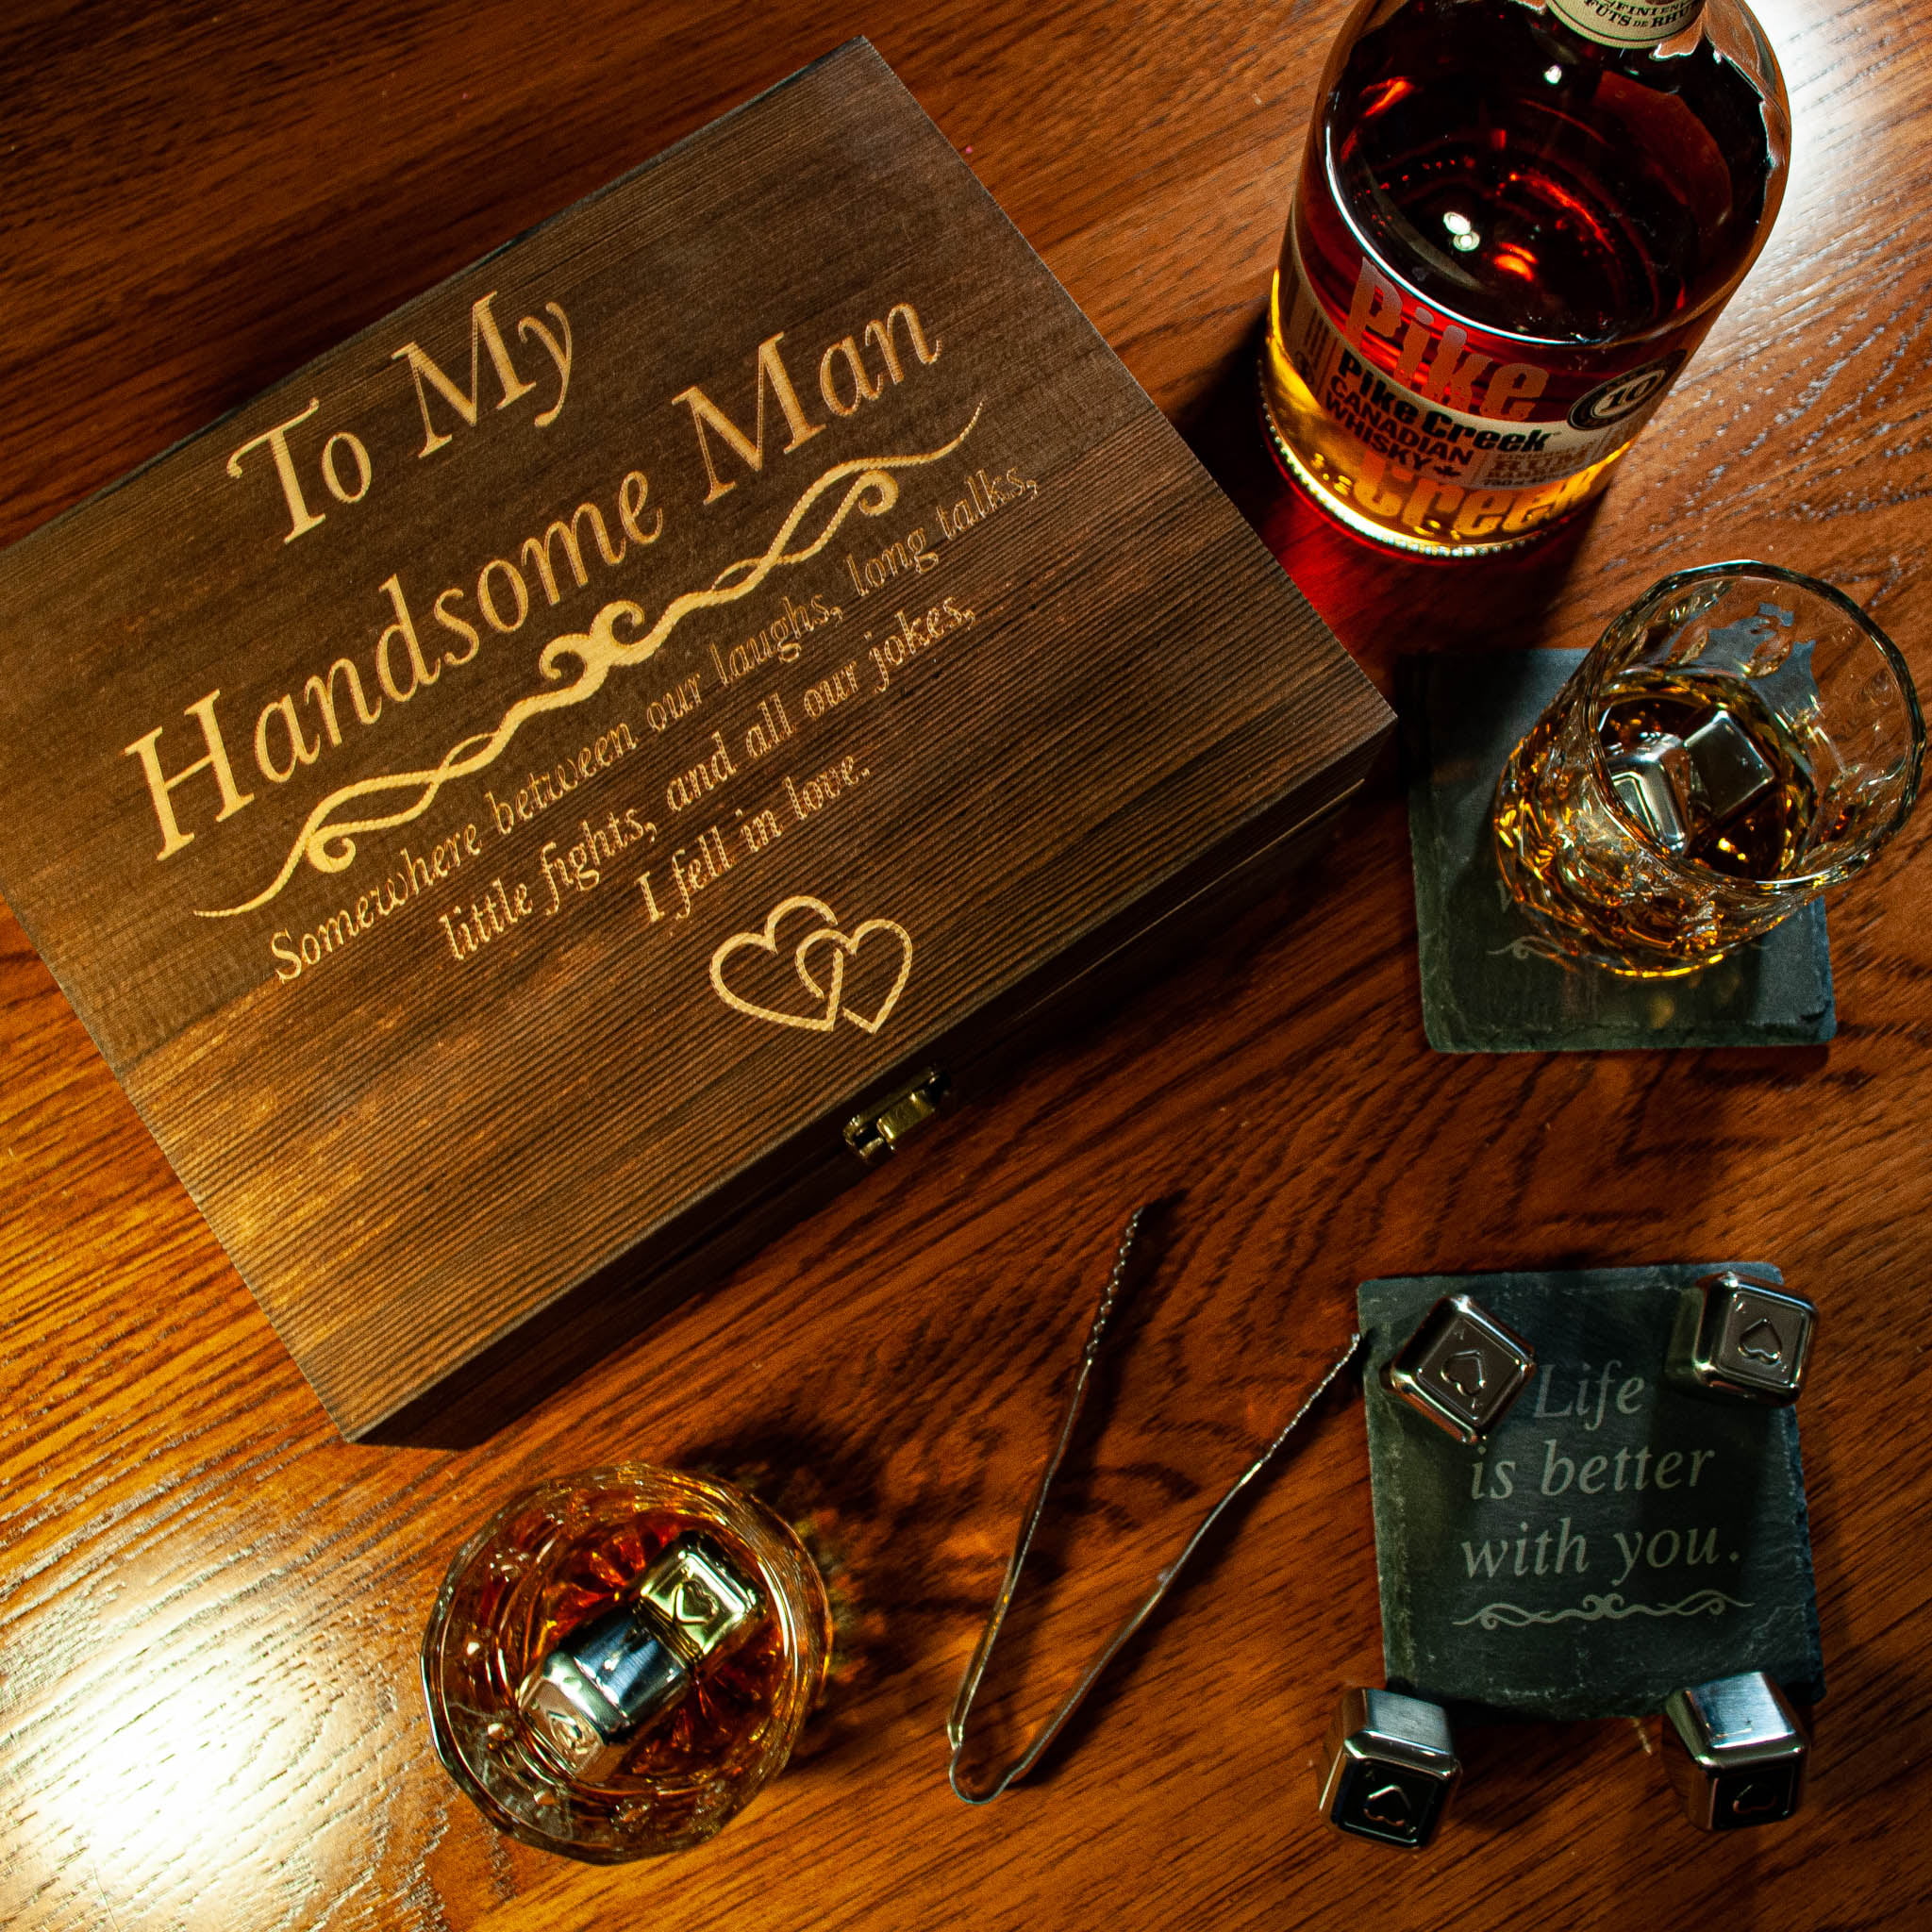 Fiance Husband Whiskey Glass Set Engraved 'To My Handsome Man” Gi fts for Birthday Wedding Anniversary Men Christmas Anniversary Gi fts for Him Boyfriend 